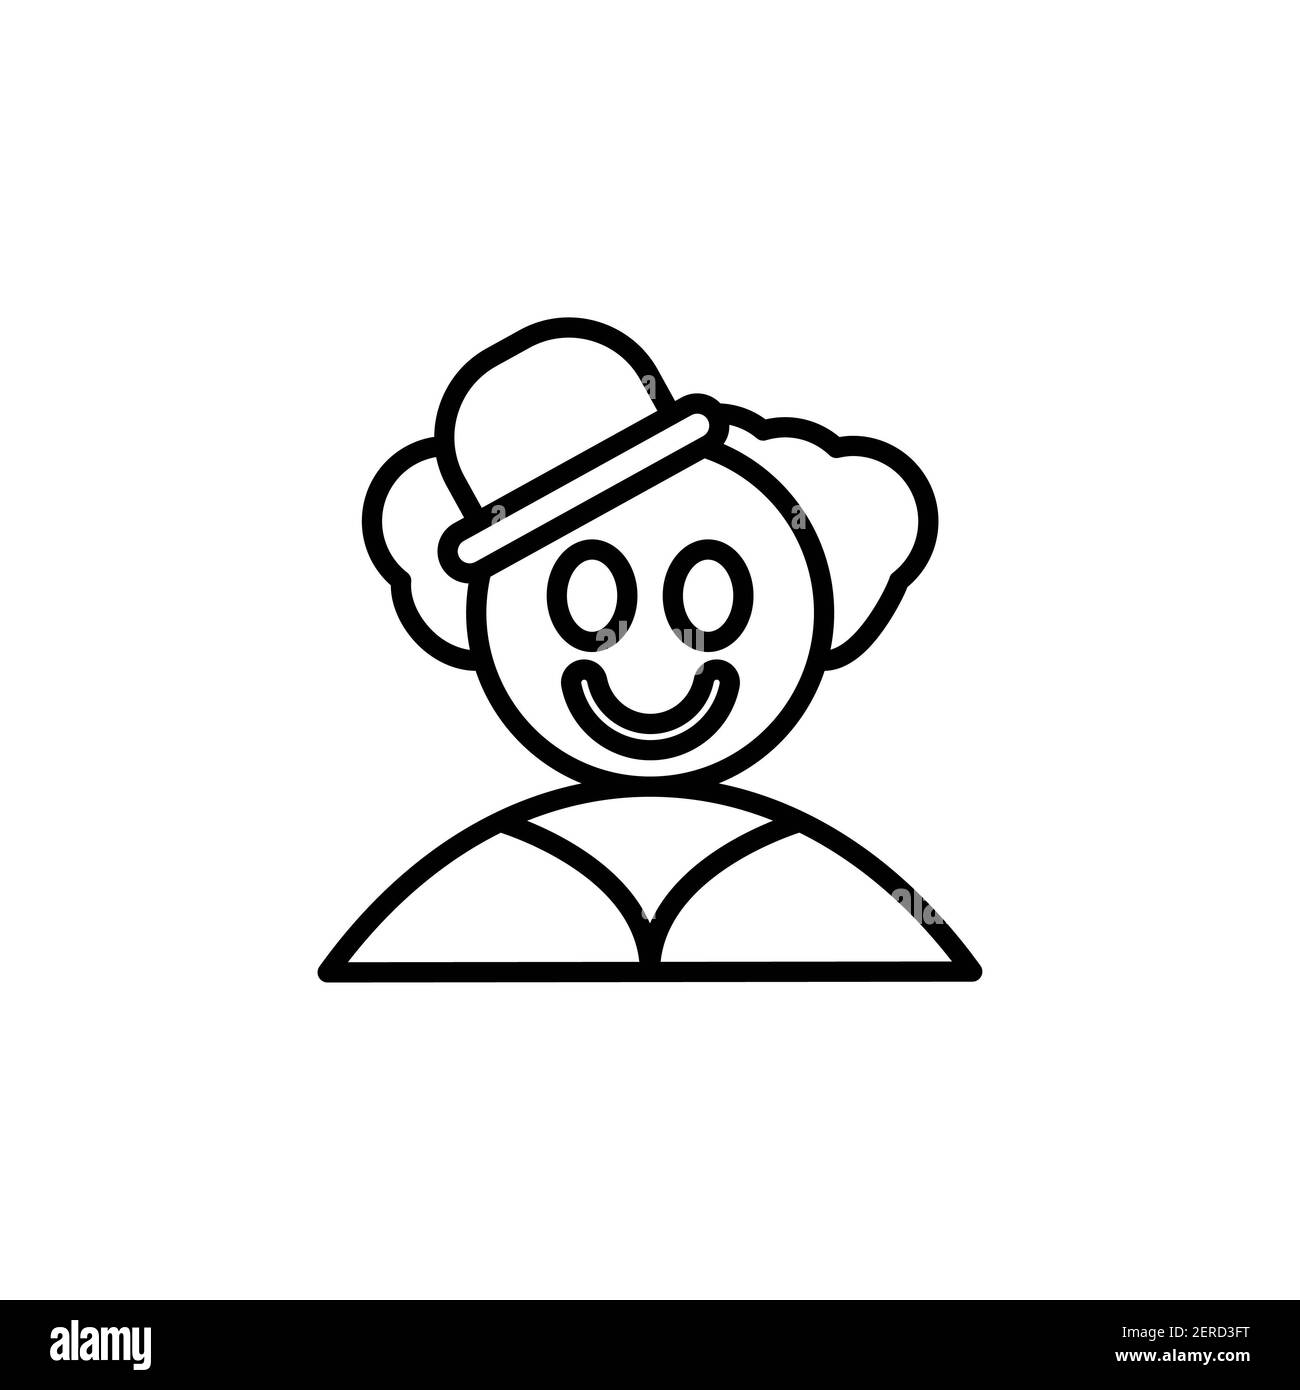 clown outline Icon.carnival and tool vector illustration on white background Stock Photo